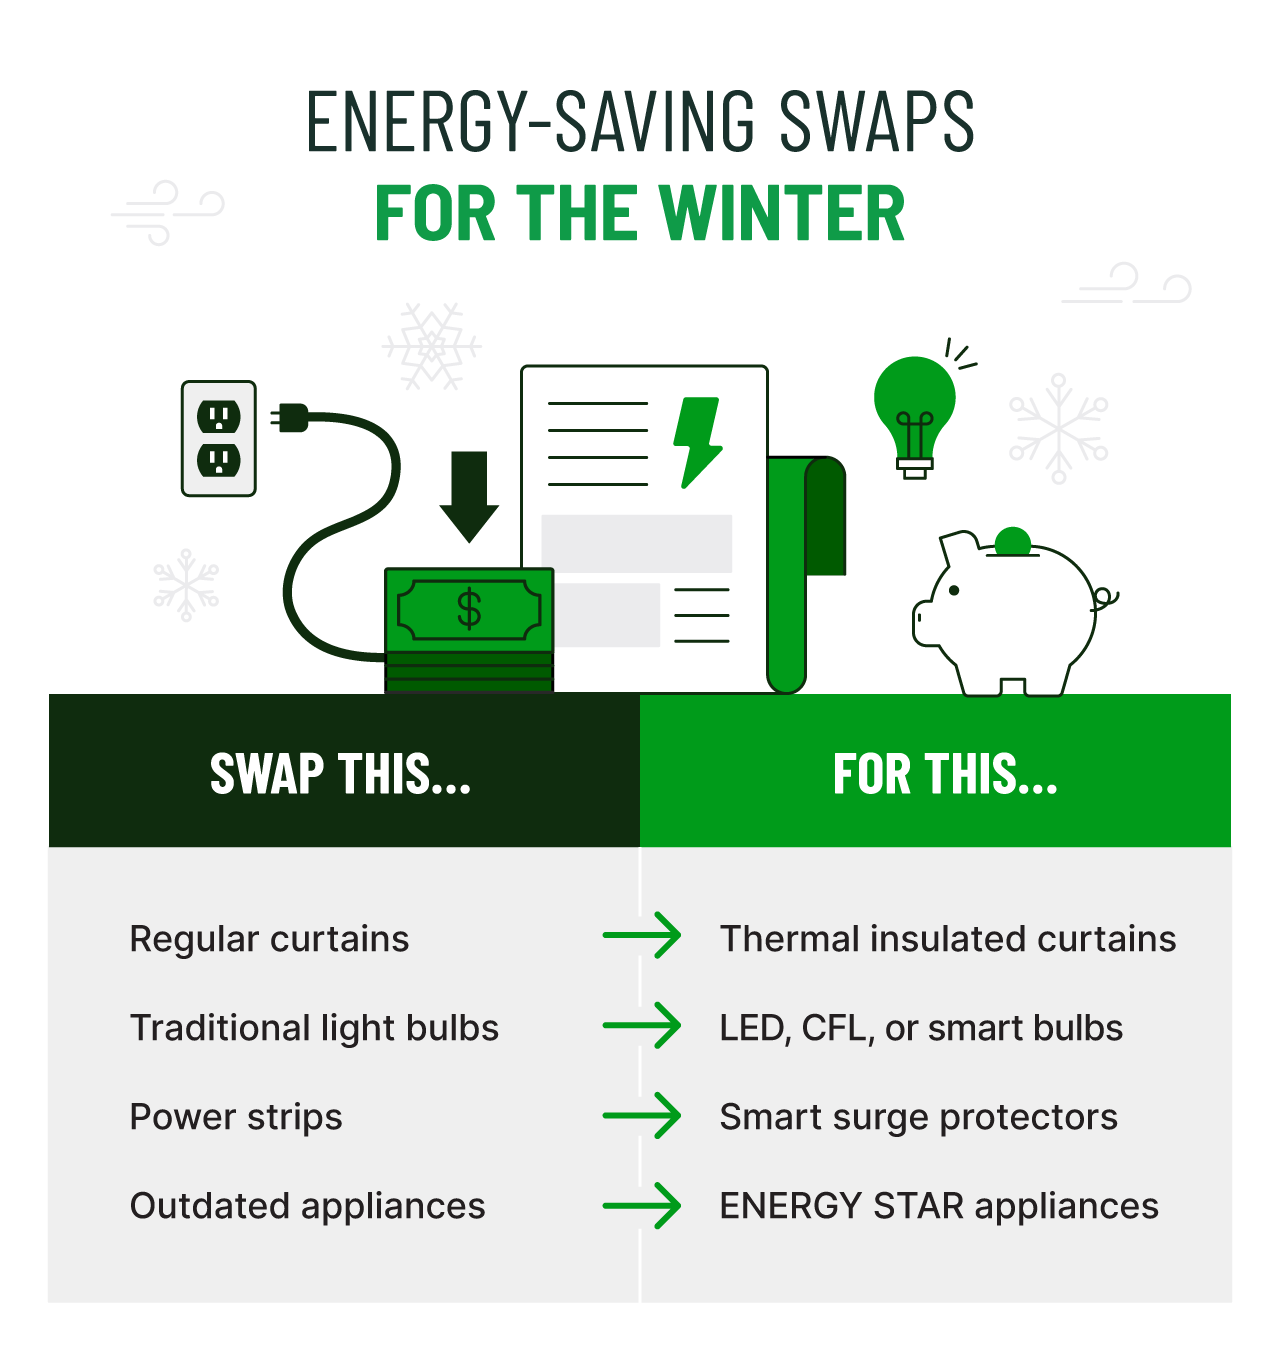 examples of energy-saving swaps homeowners can do for the winter